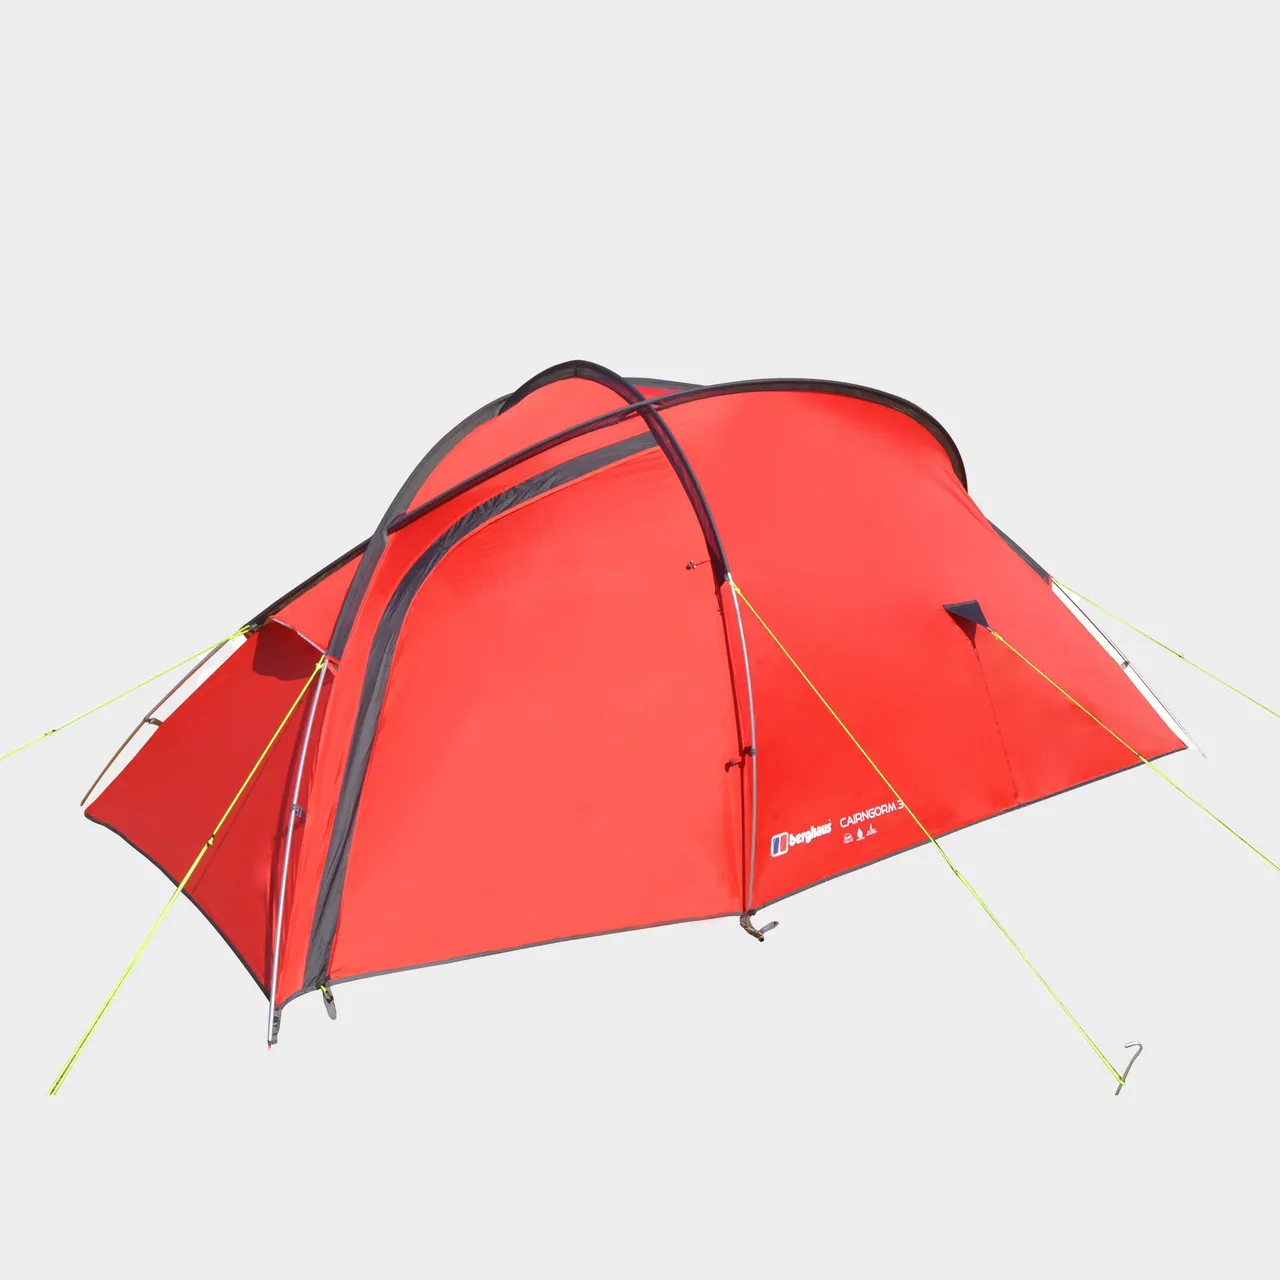 Cairngorm 3 Tent - Red, Red